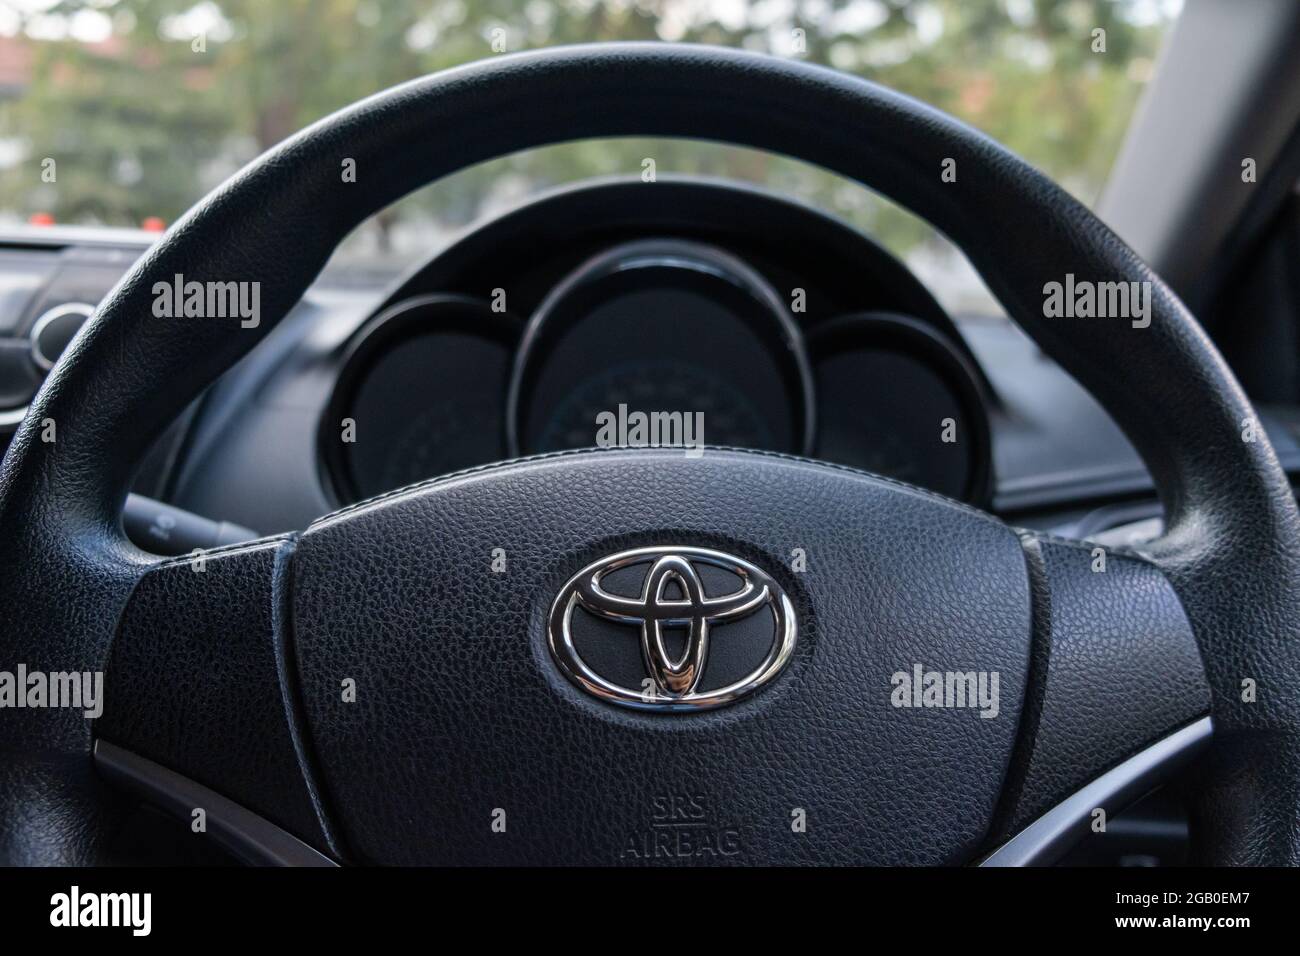 Bangkok, Thailand - May 22, 2020: Showing the interior view of All New Vios by Toyota Eco car before driving to travel in Bangkok, Thailand. Stock Photo